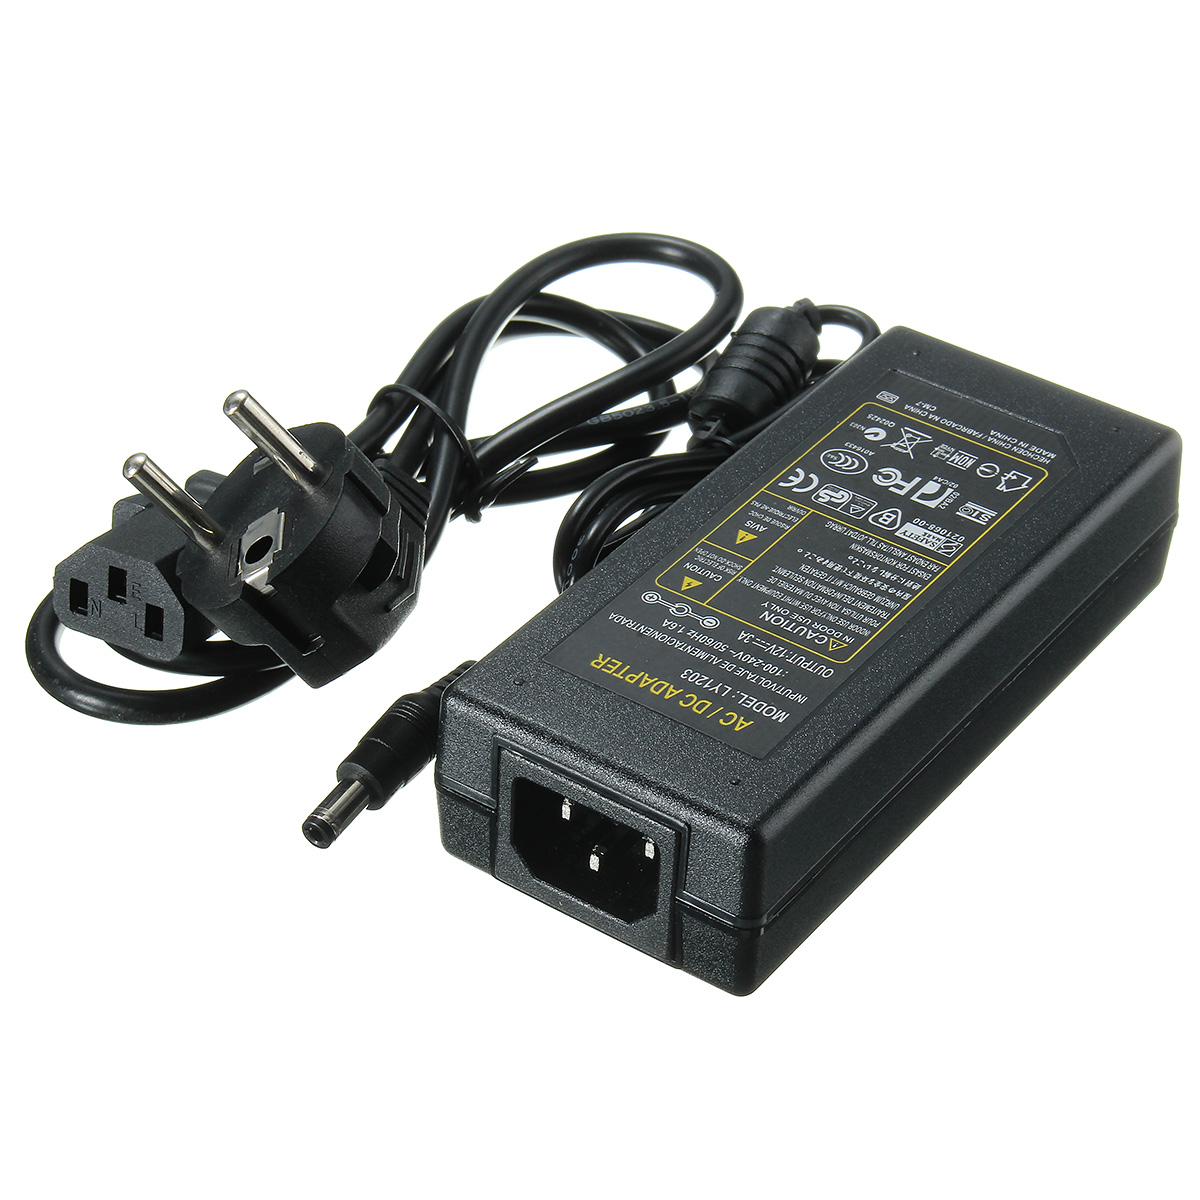 AC-100-240V-to-DC-12V-3A-36W-Power-Supply-Adapter-for-LED-Strip-86979-3